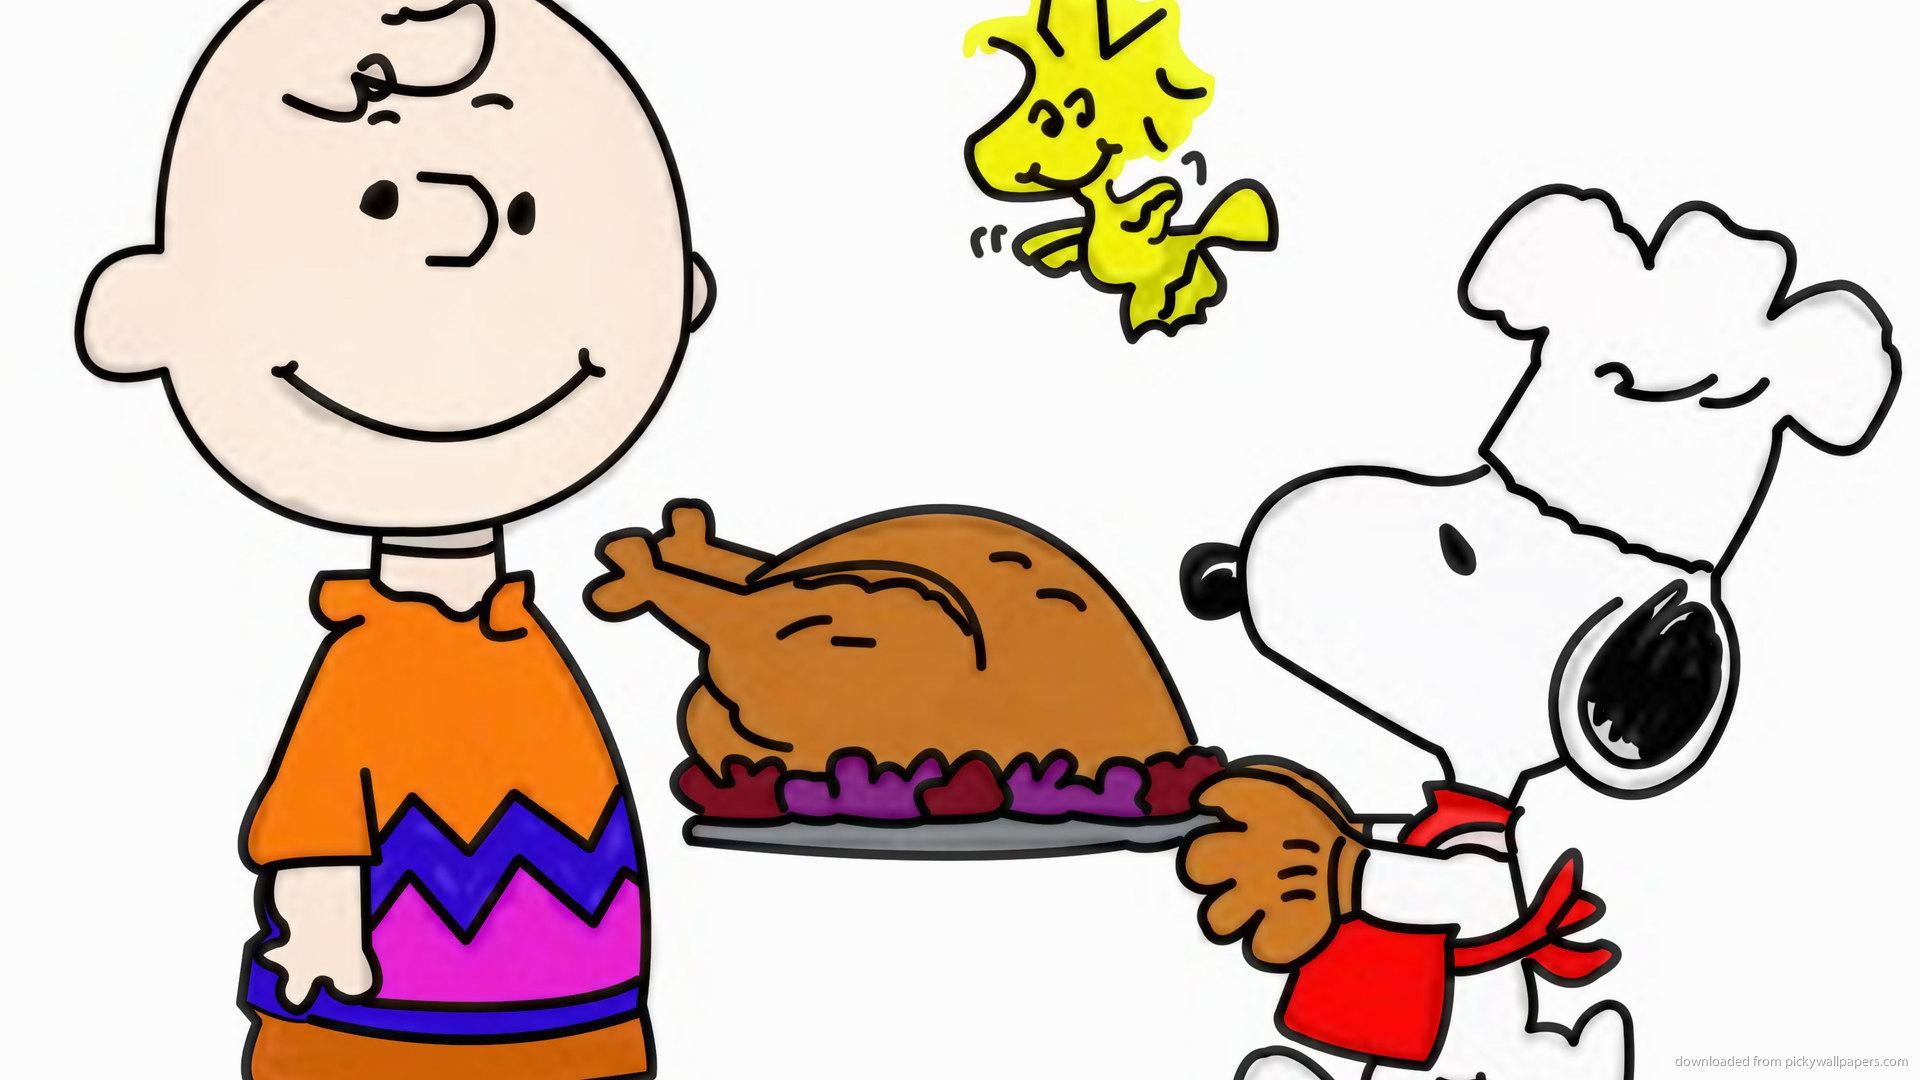 Snoopy wallpaper hd of 3 wallpaper wiki peanuts characters wallpapers